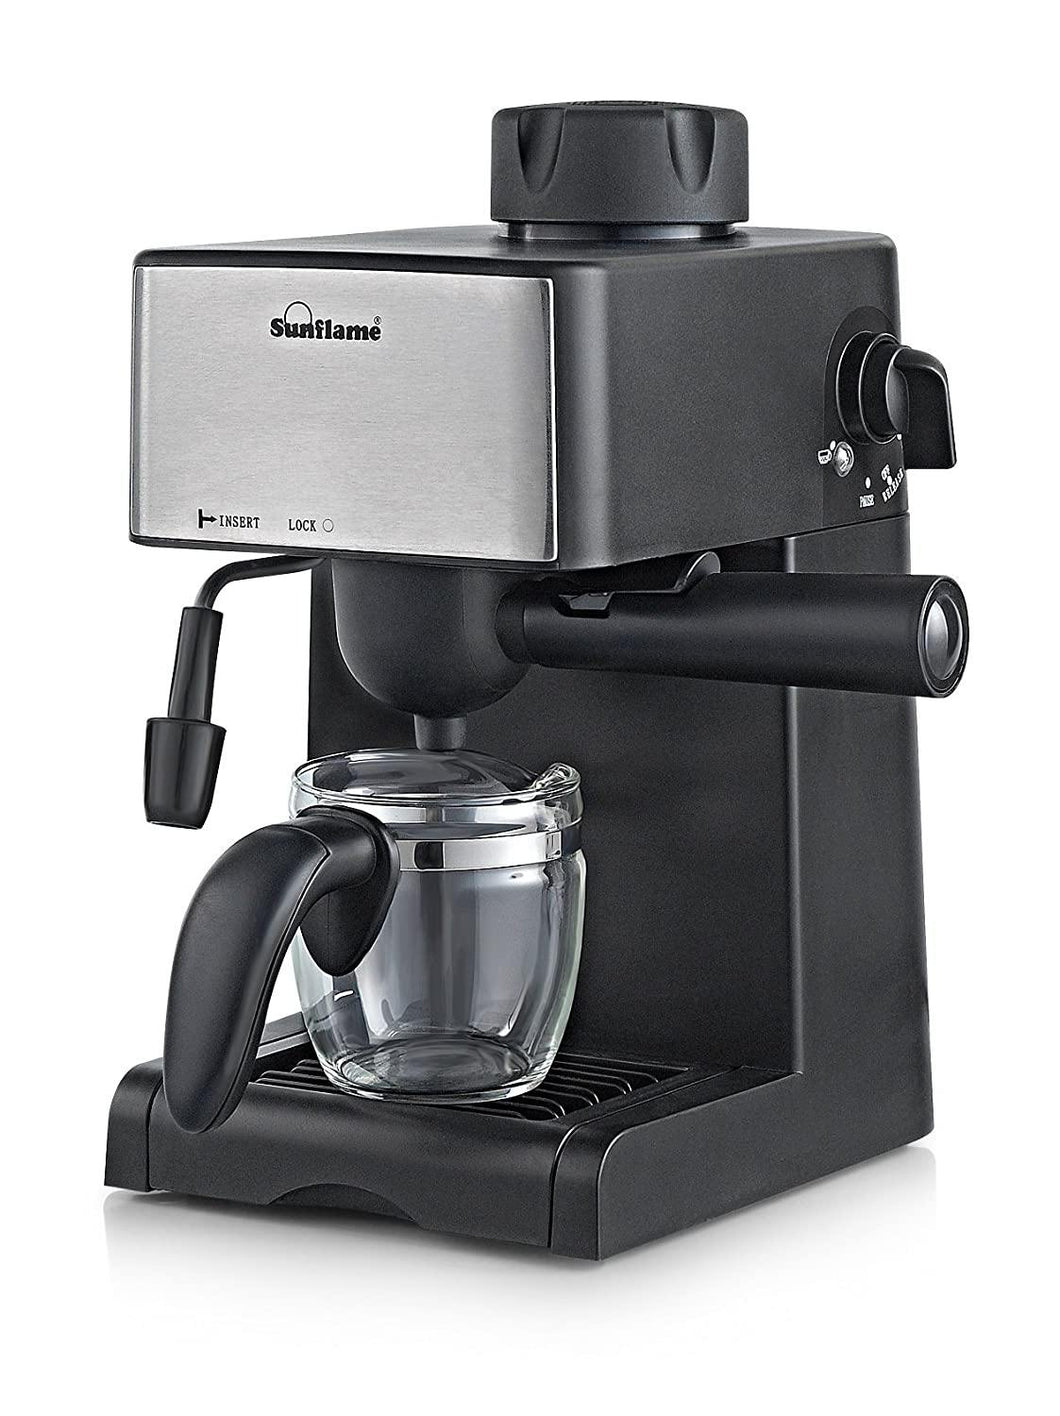 SUNFLAME 4 CUPS EXPRESSO COFFEE MAKER, BLACK, SF 712, 800 WATTS - KOCHEN ESSENTIAL